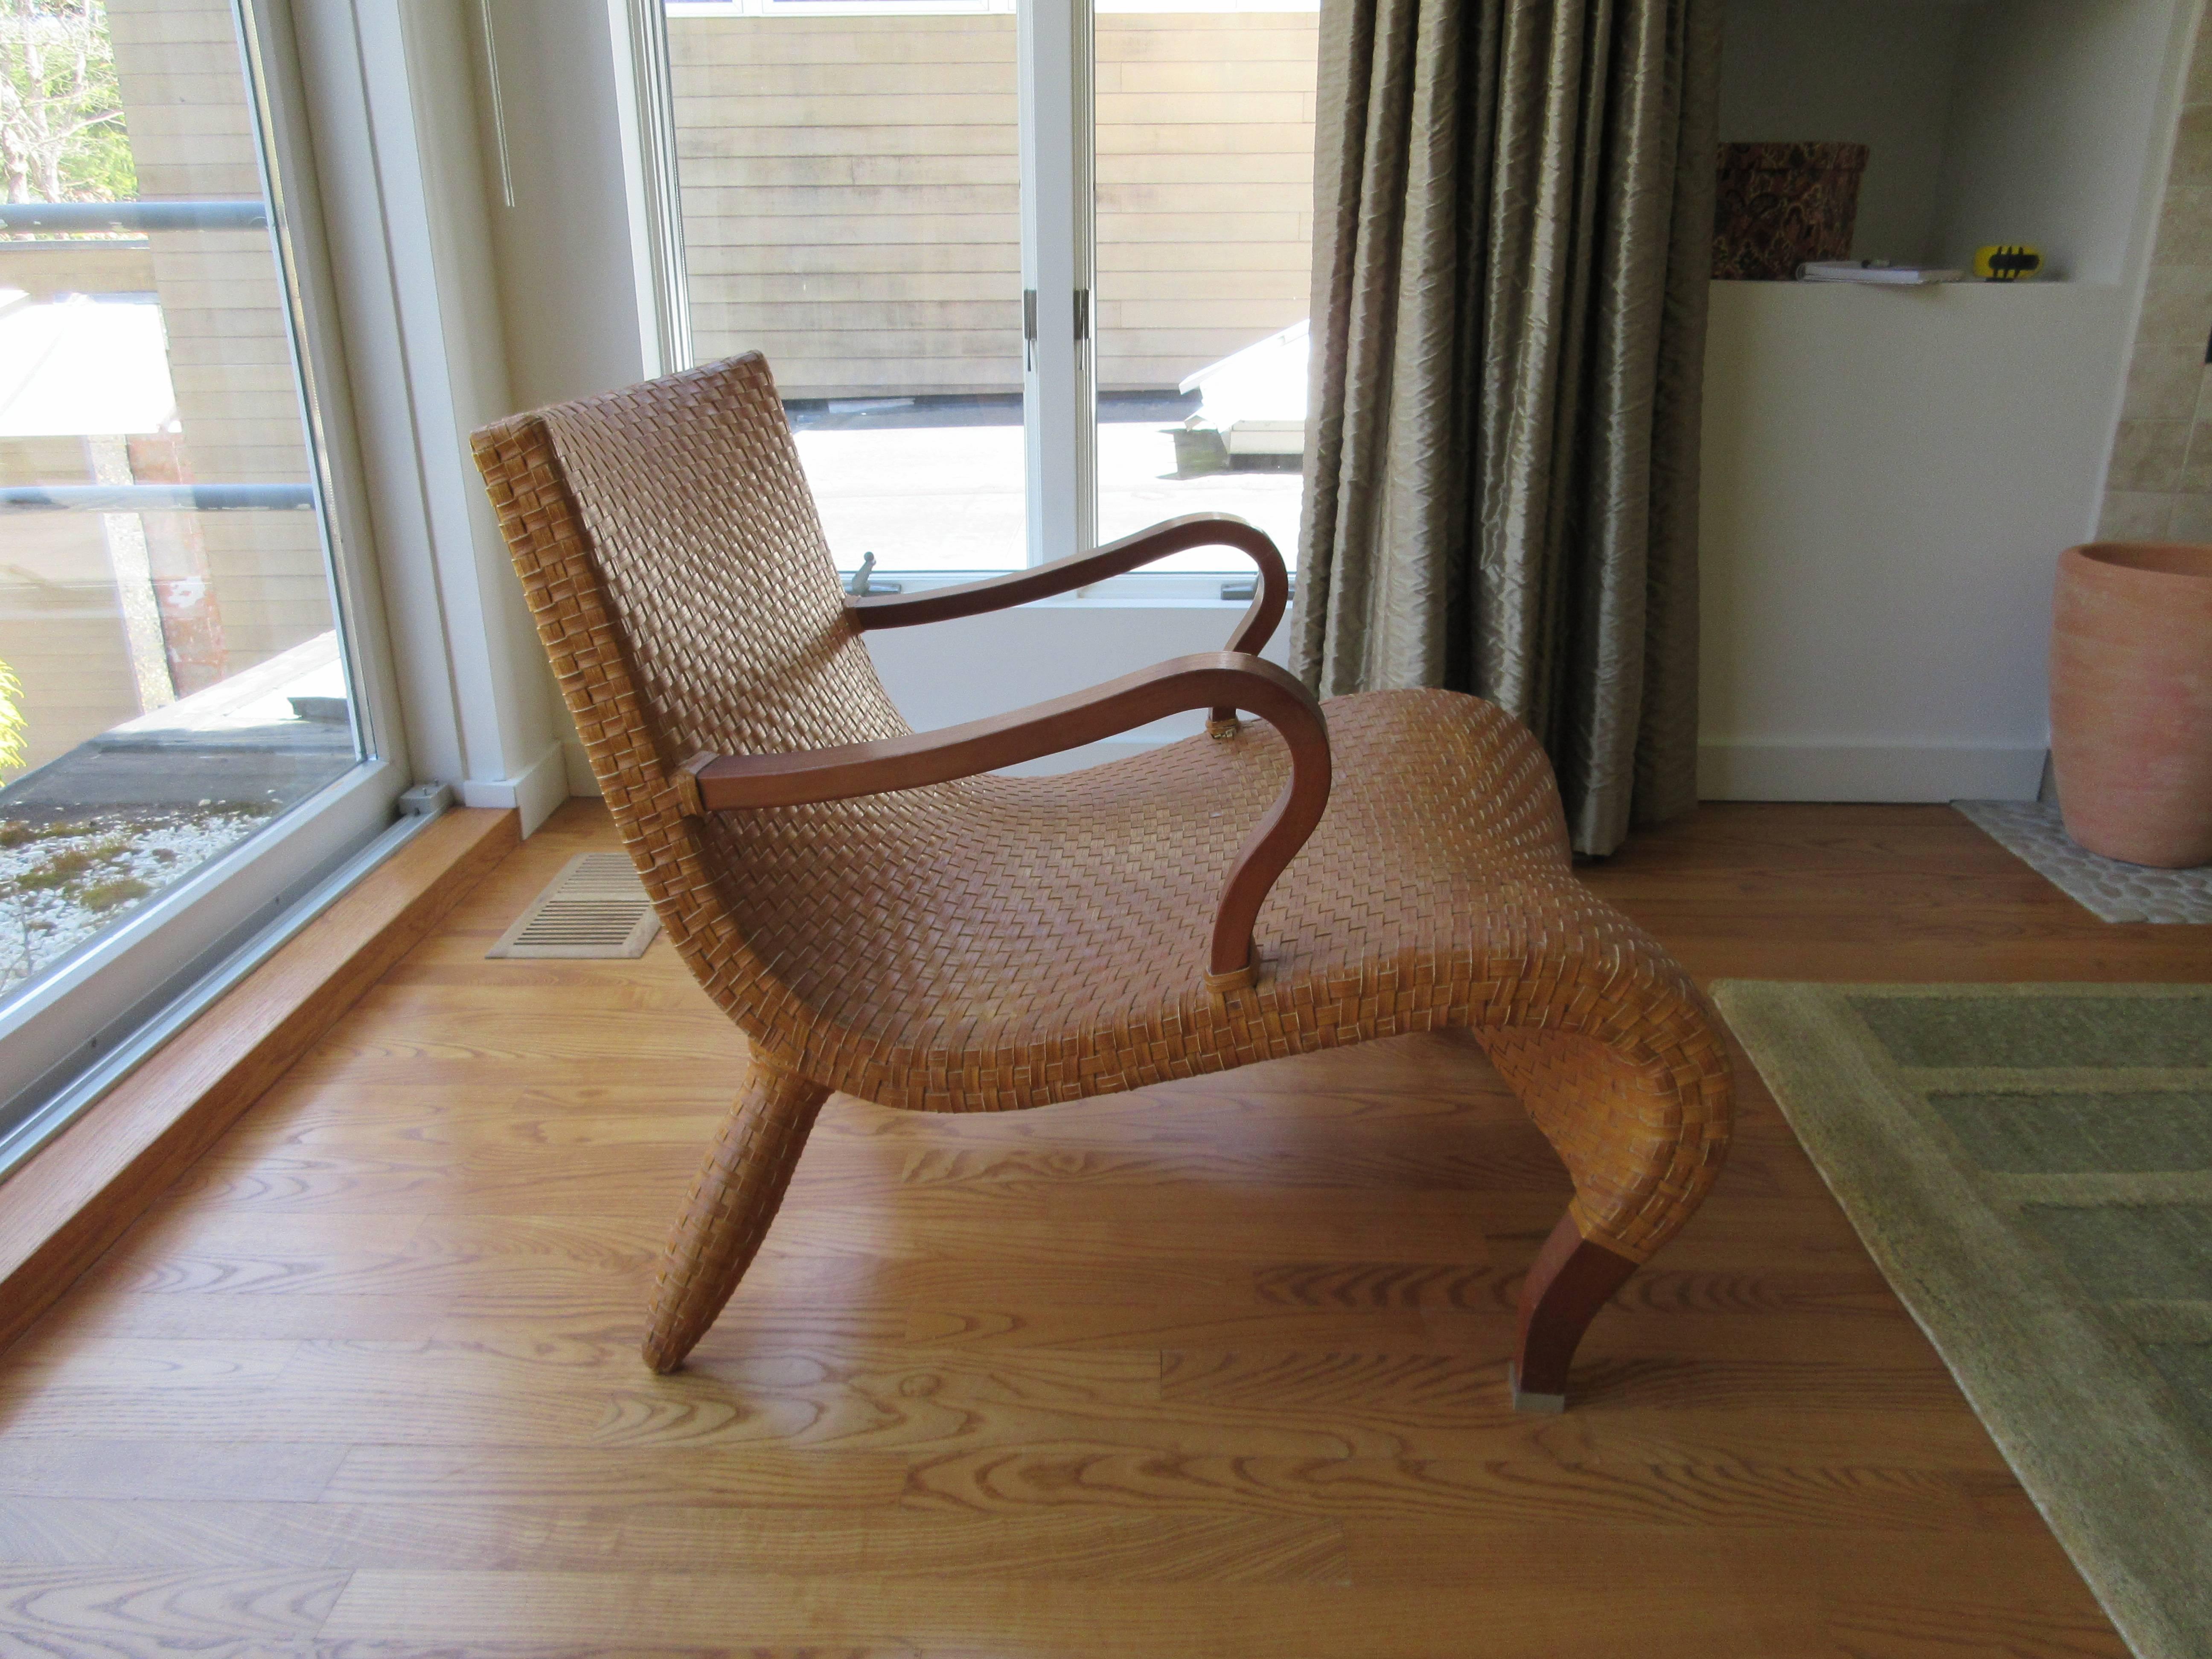 A fabulous large Mid-Century Modern leather woven armchair in a rich toffee brown soft leather.
Arms and legs in a deep cheerywood.
Measures: Seat height 14 inches, inside seat depth 23 inches, arm height 22 inches, 35 inches deep.
Splayed back